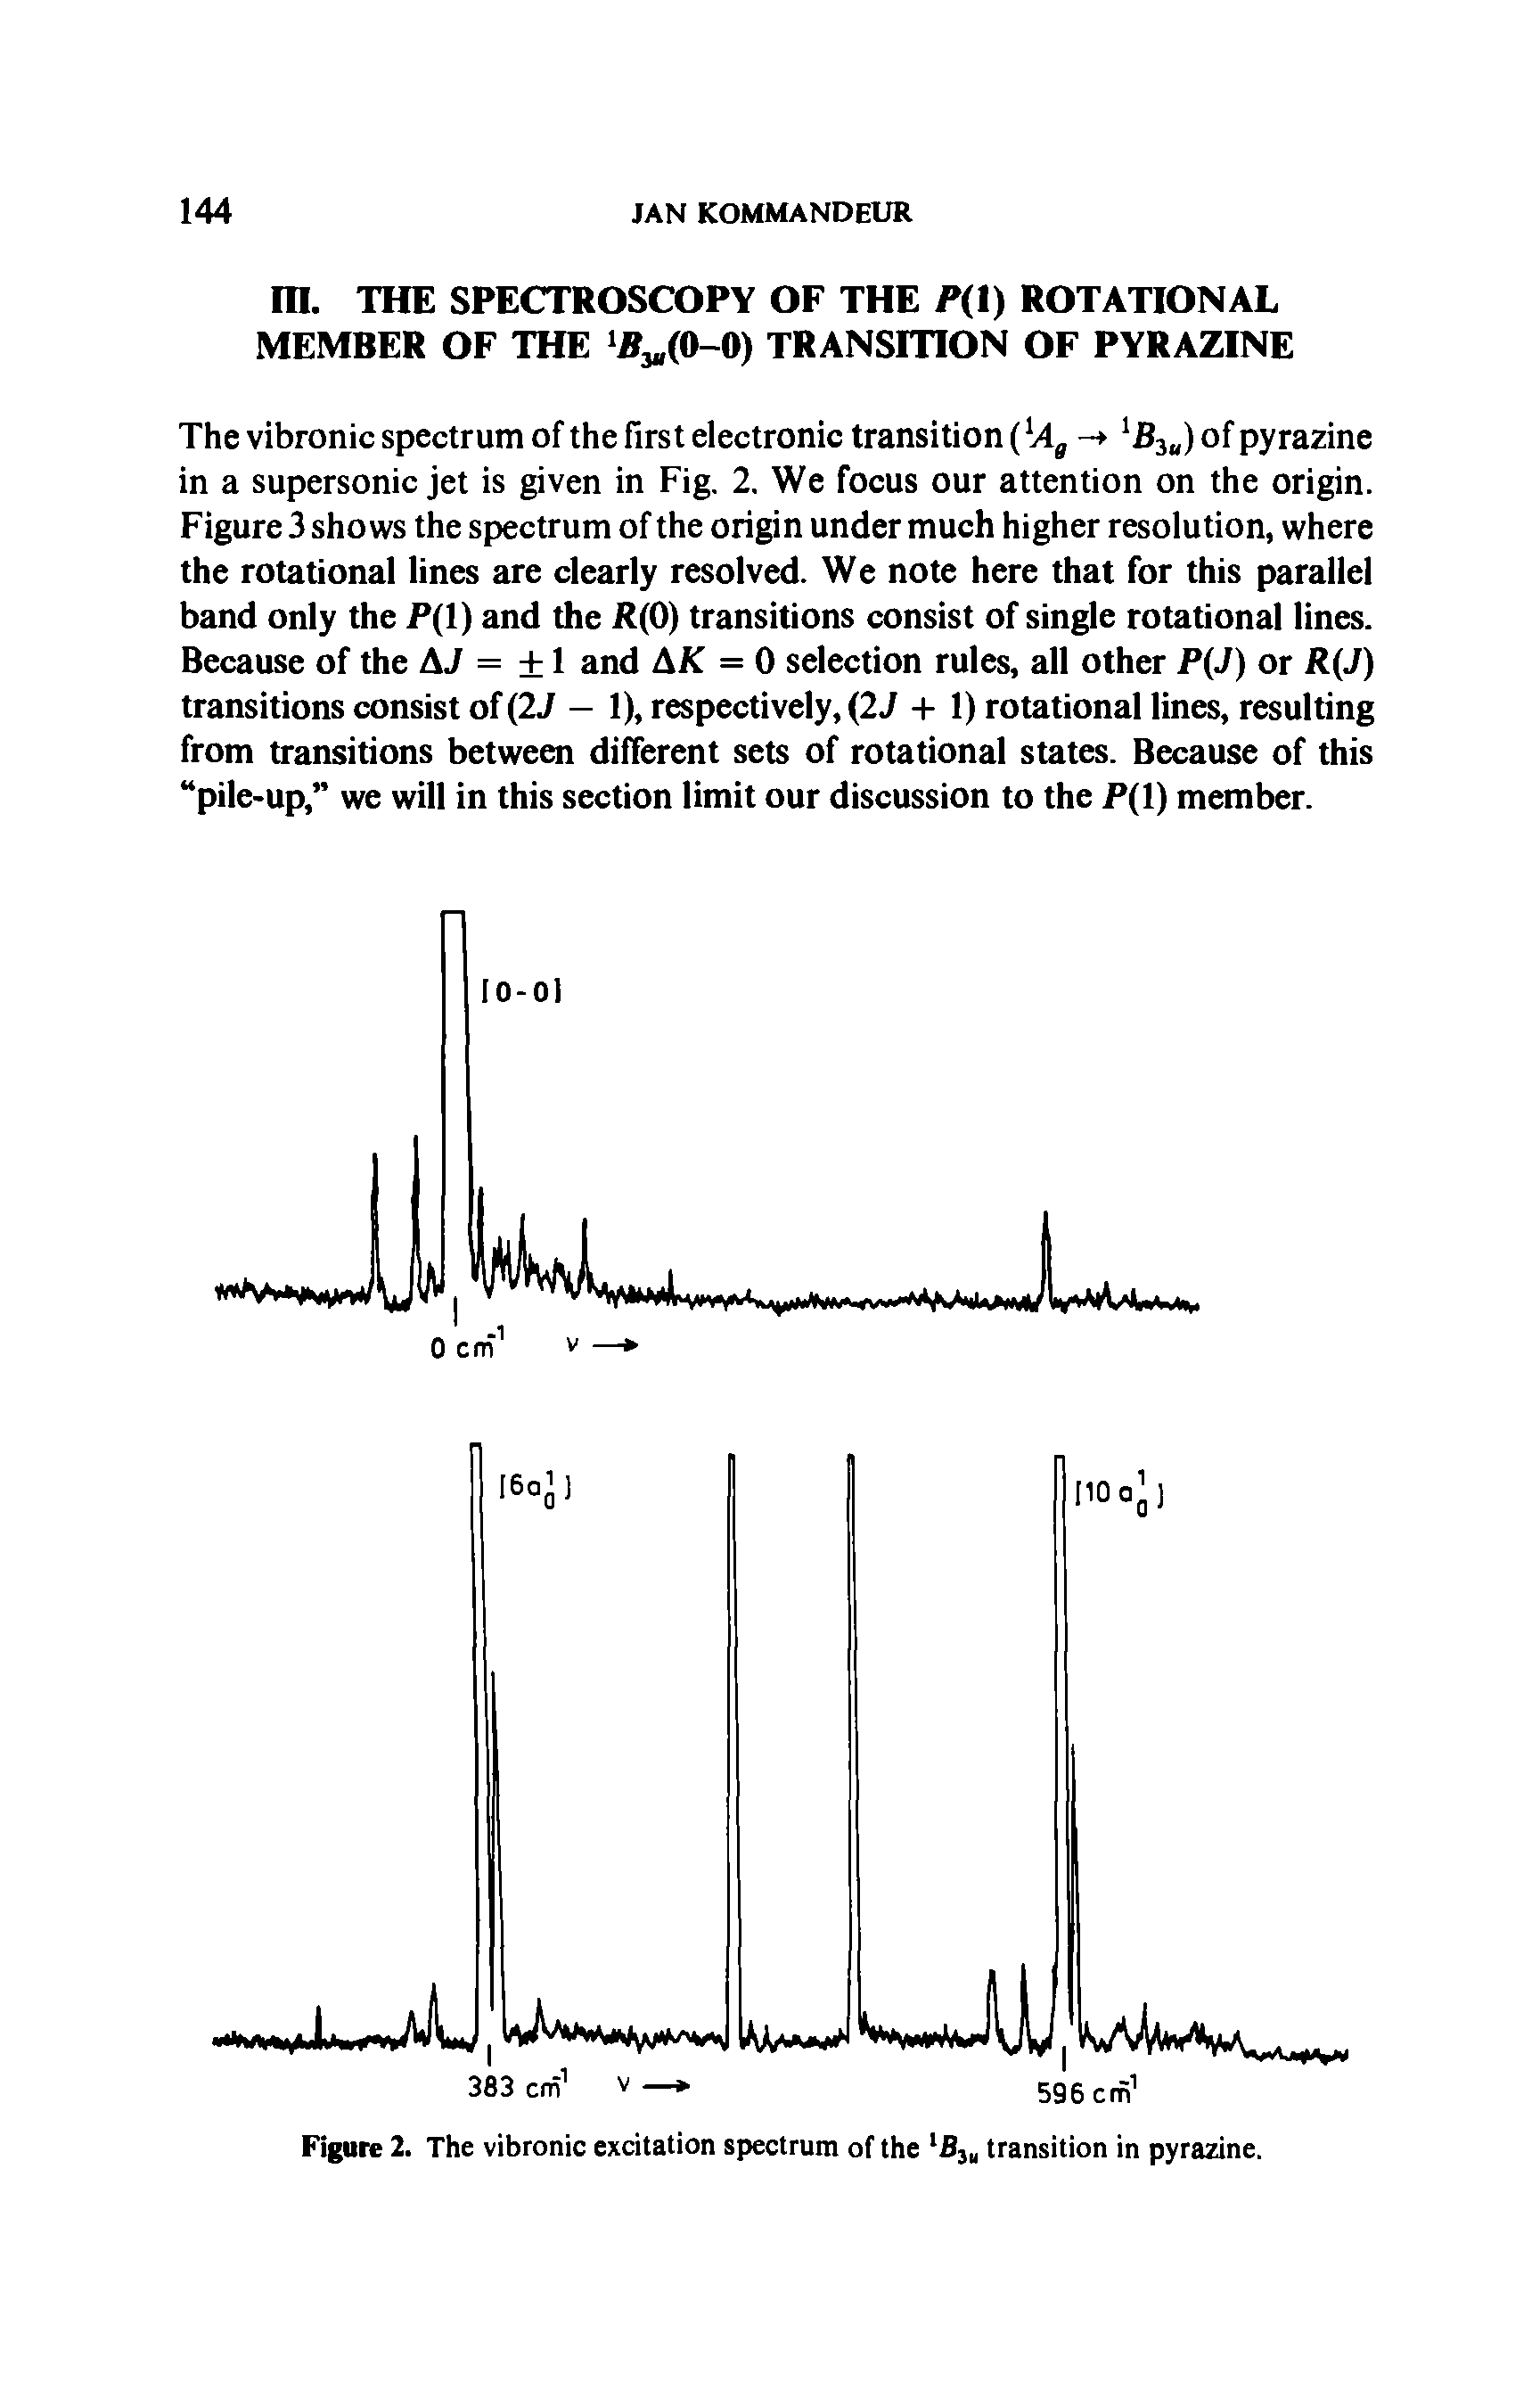 Figure 2. The vibronic excitation spectrum of the lBJU transition in pyrazine.